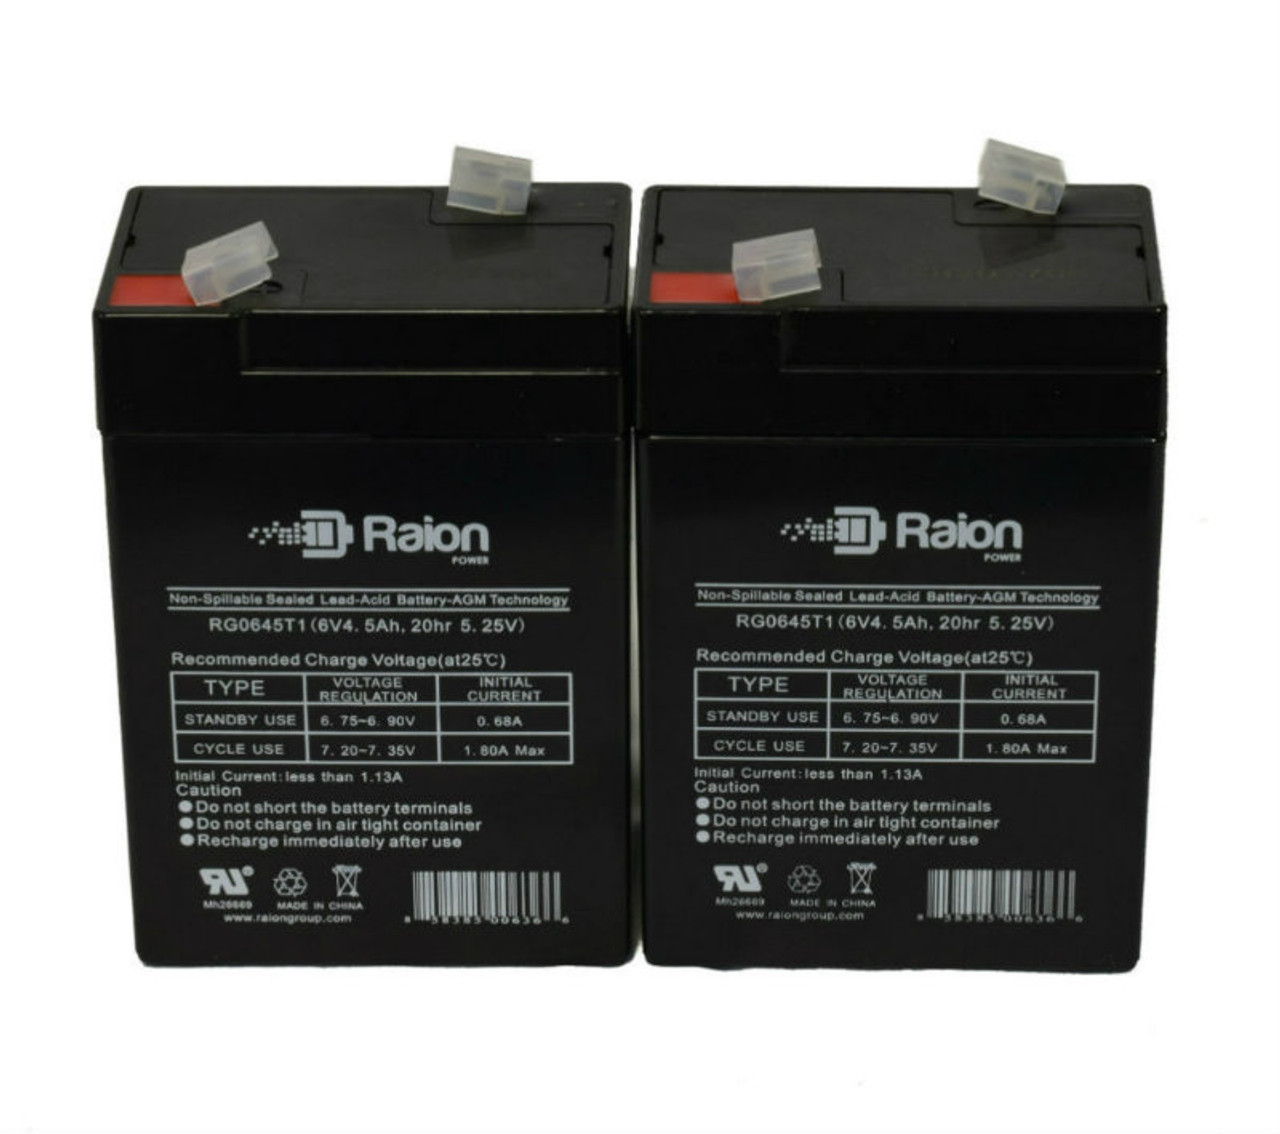 Raion Power 6 Volt 4.5Ah RG0645T1 Replacement Battery for TLV642 - 2 Pack